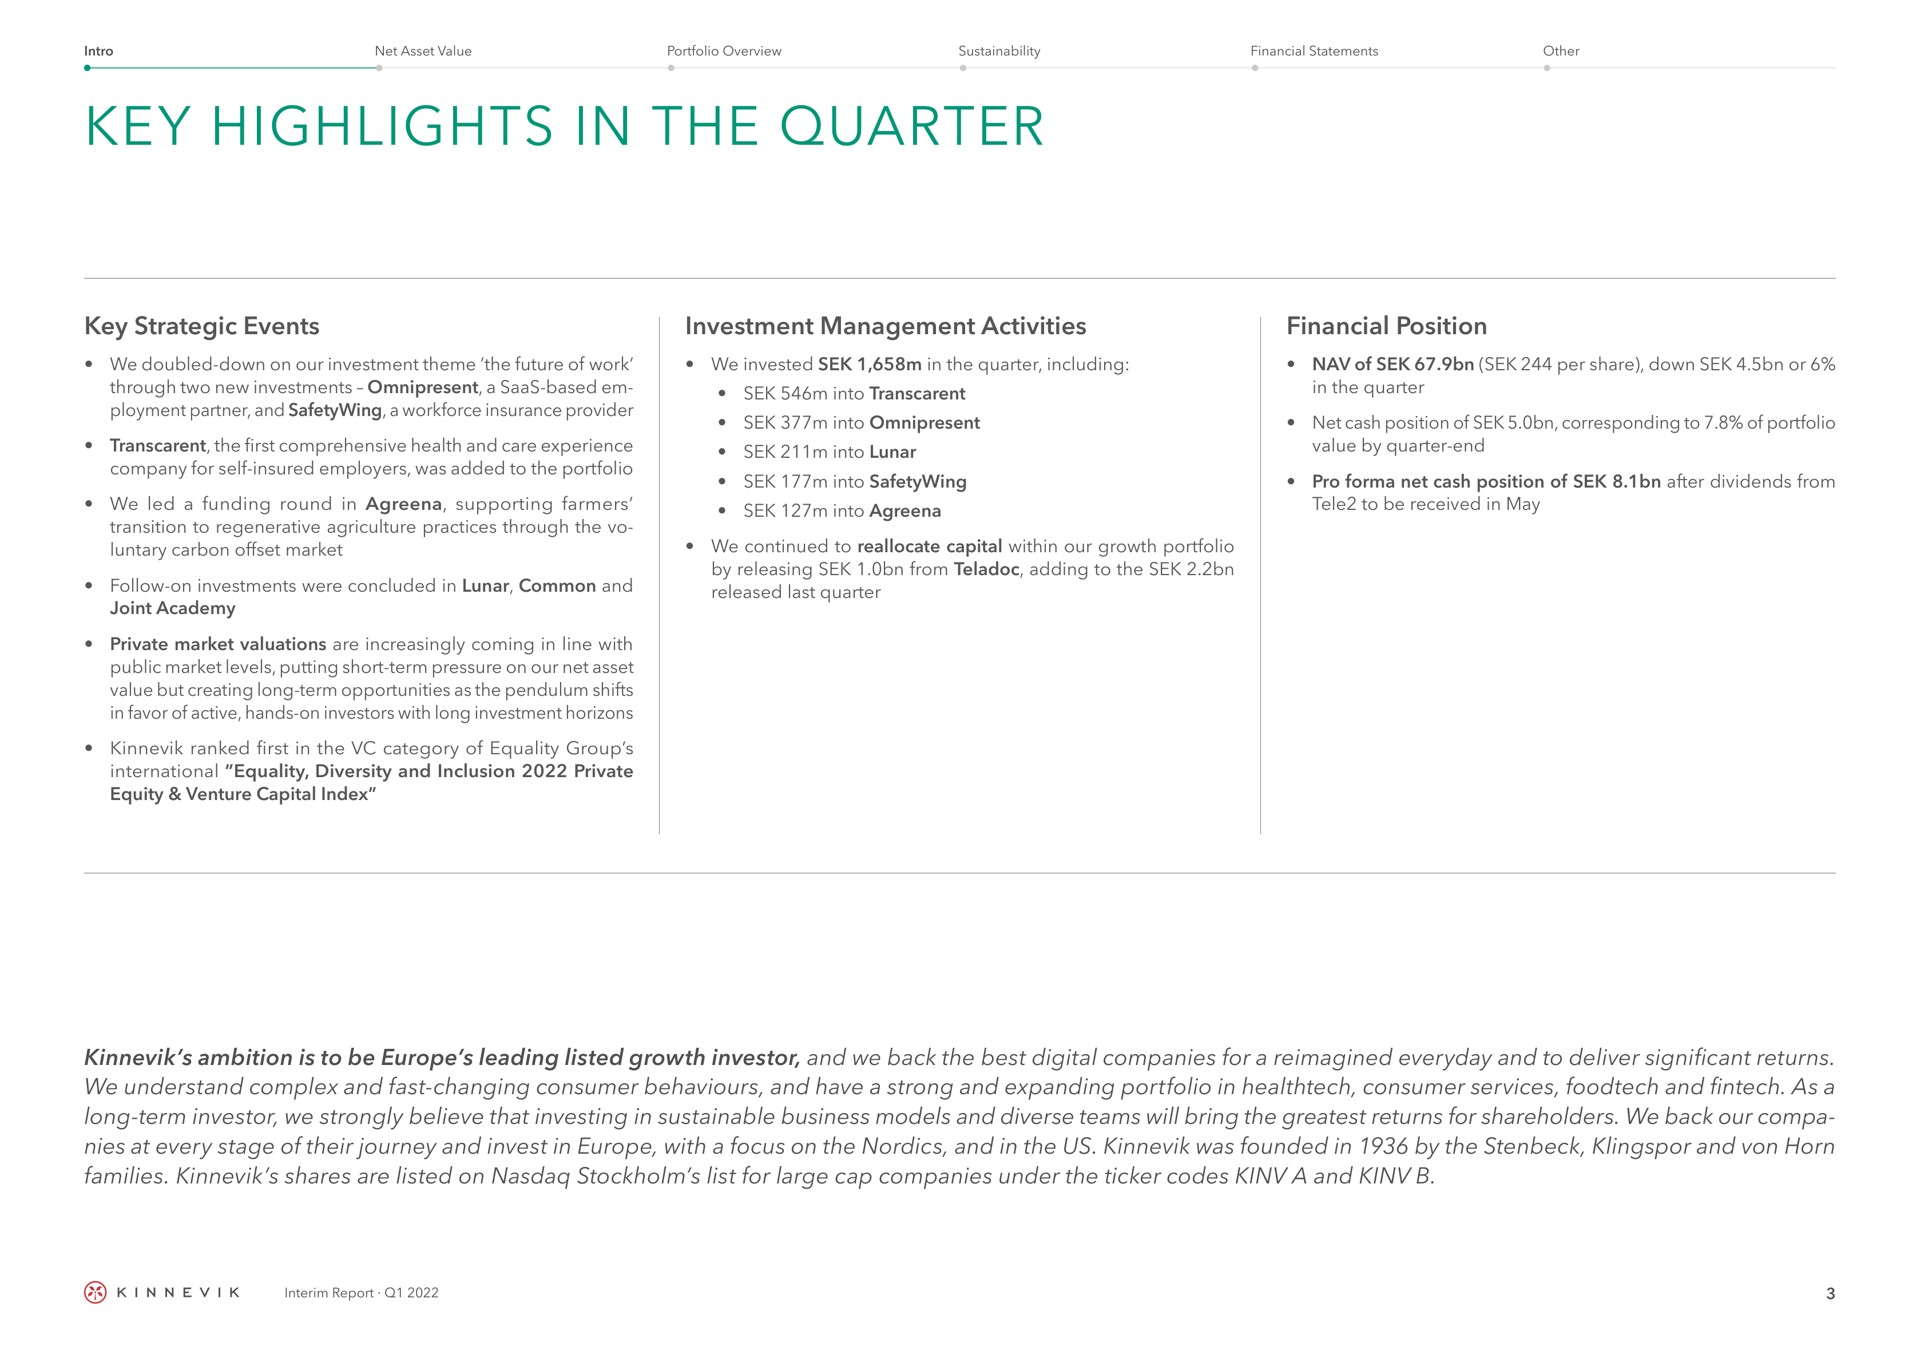 key highlights in the quarter key strategic events investment management activities financial position we invested in the quarter including of per share down or into into omnipresent into lunar into into in the quarter net cash position of corresponding to of portfolio value by quarter end pro net cash position of after dividends from tele to be received in may we continued to reallocate capital within our growth portfolio by releasing from adding to the released last quarter we doubled down on our investment theme the future of work through two new investments omnipresent a based ployment partner and a insurance provider the first comprehensive health and care experience company for self insured employers was added to the portfolio we led a funding round in supporting farmers transition to regenerative agriculture practices through the carbon offset market follow on investments were concluded in lunar common and joint academy private market valuations are increasingly coming in line with public market levels putting short term pressure on our net asset value but creating long term opportunities as the pendulum shifts in favor of active hands on investors with long investment horizons ranked first in the category of equality group international equality diversity and inclusion private equity venture capital index ambition is to be leading listed growth investor and we back the best digital companies for a everyday and to deliver significant returns we understand complex and fast changing consumer behaviours and have a strong and expanding portfolio in consumer services and as a long term investor we strongly believe that investing in sustainable business models and diverse teams will bring the returns for shareholders we back our at every stage of their journey and invest in with a focus on the and in the us was founded in by the and horn families shares are listed on list for large cap companies under the ticker codes a and | Kinnevik